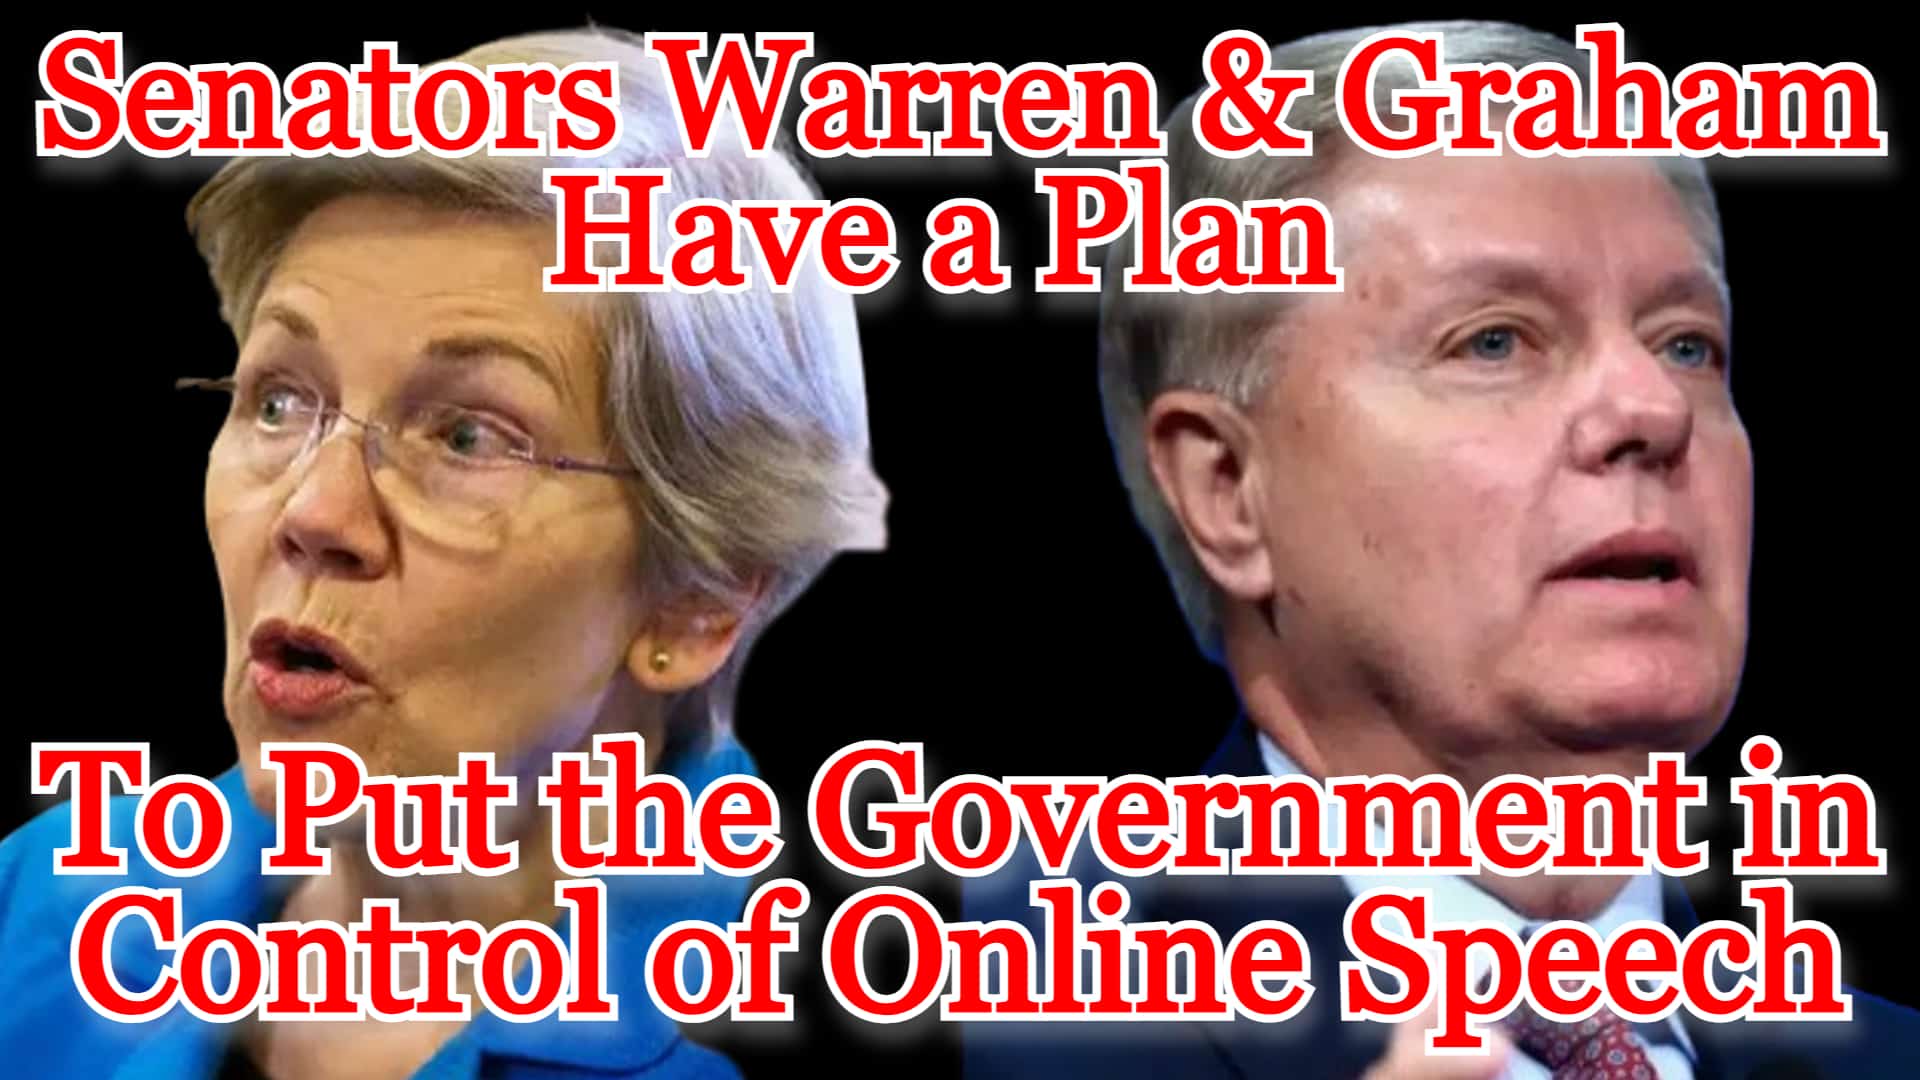 COI #454: Senators Warren and Graham Have a Plan to Put the Government in Control of Online Speech